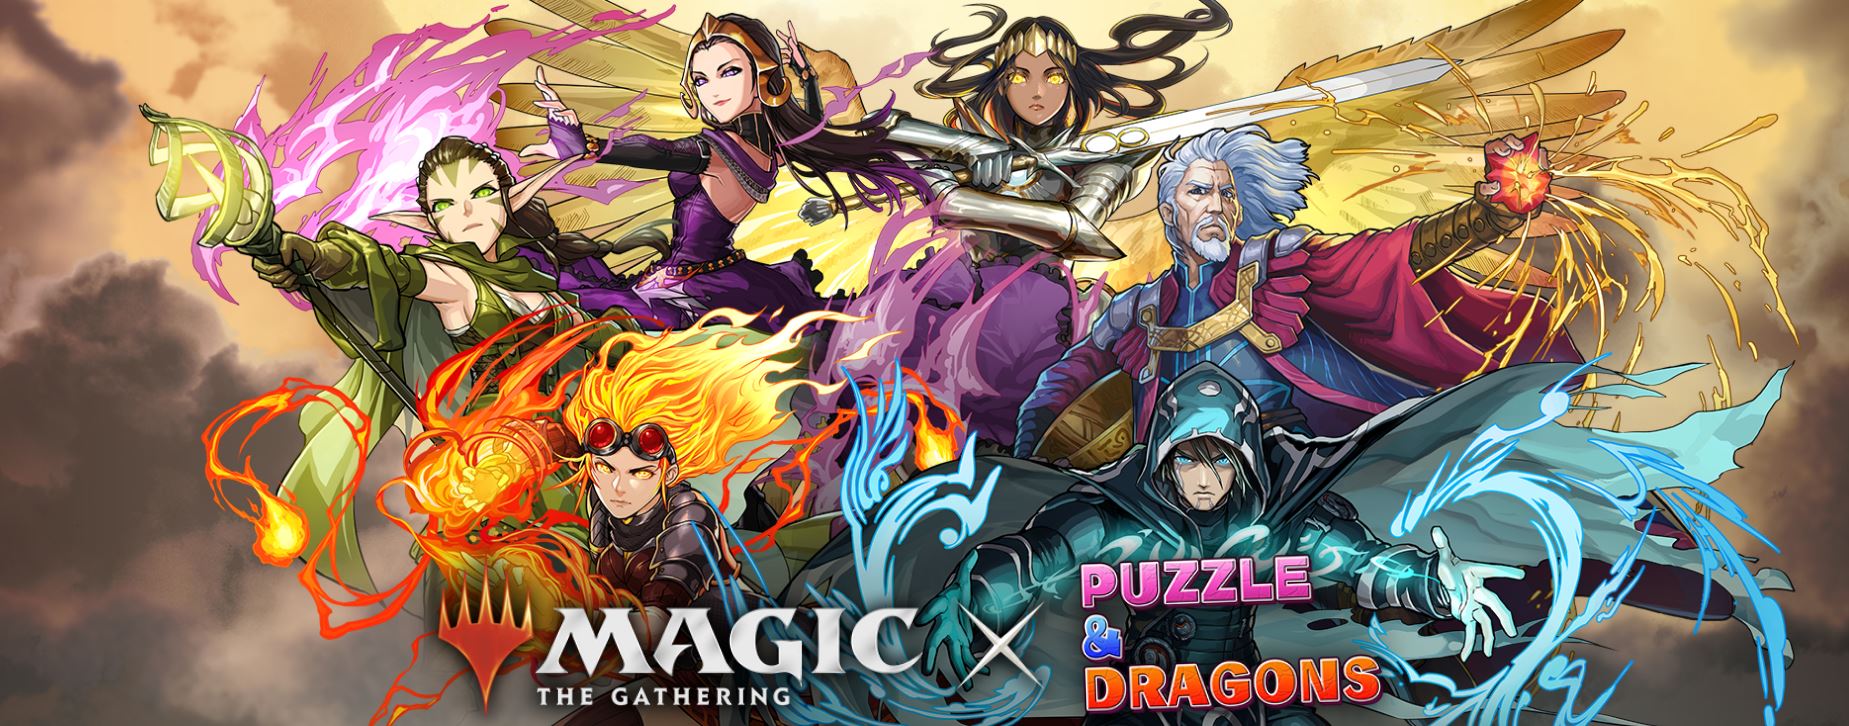 Magic The Gathering Joins Forces With Puzzle And Dragons For Second Crossover Event Star City